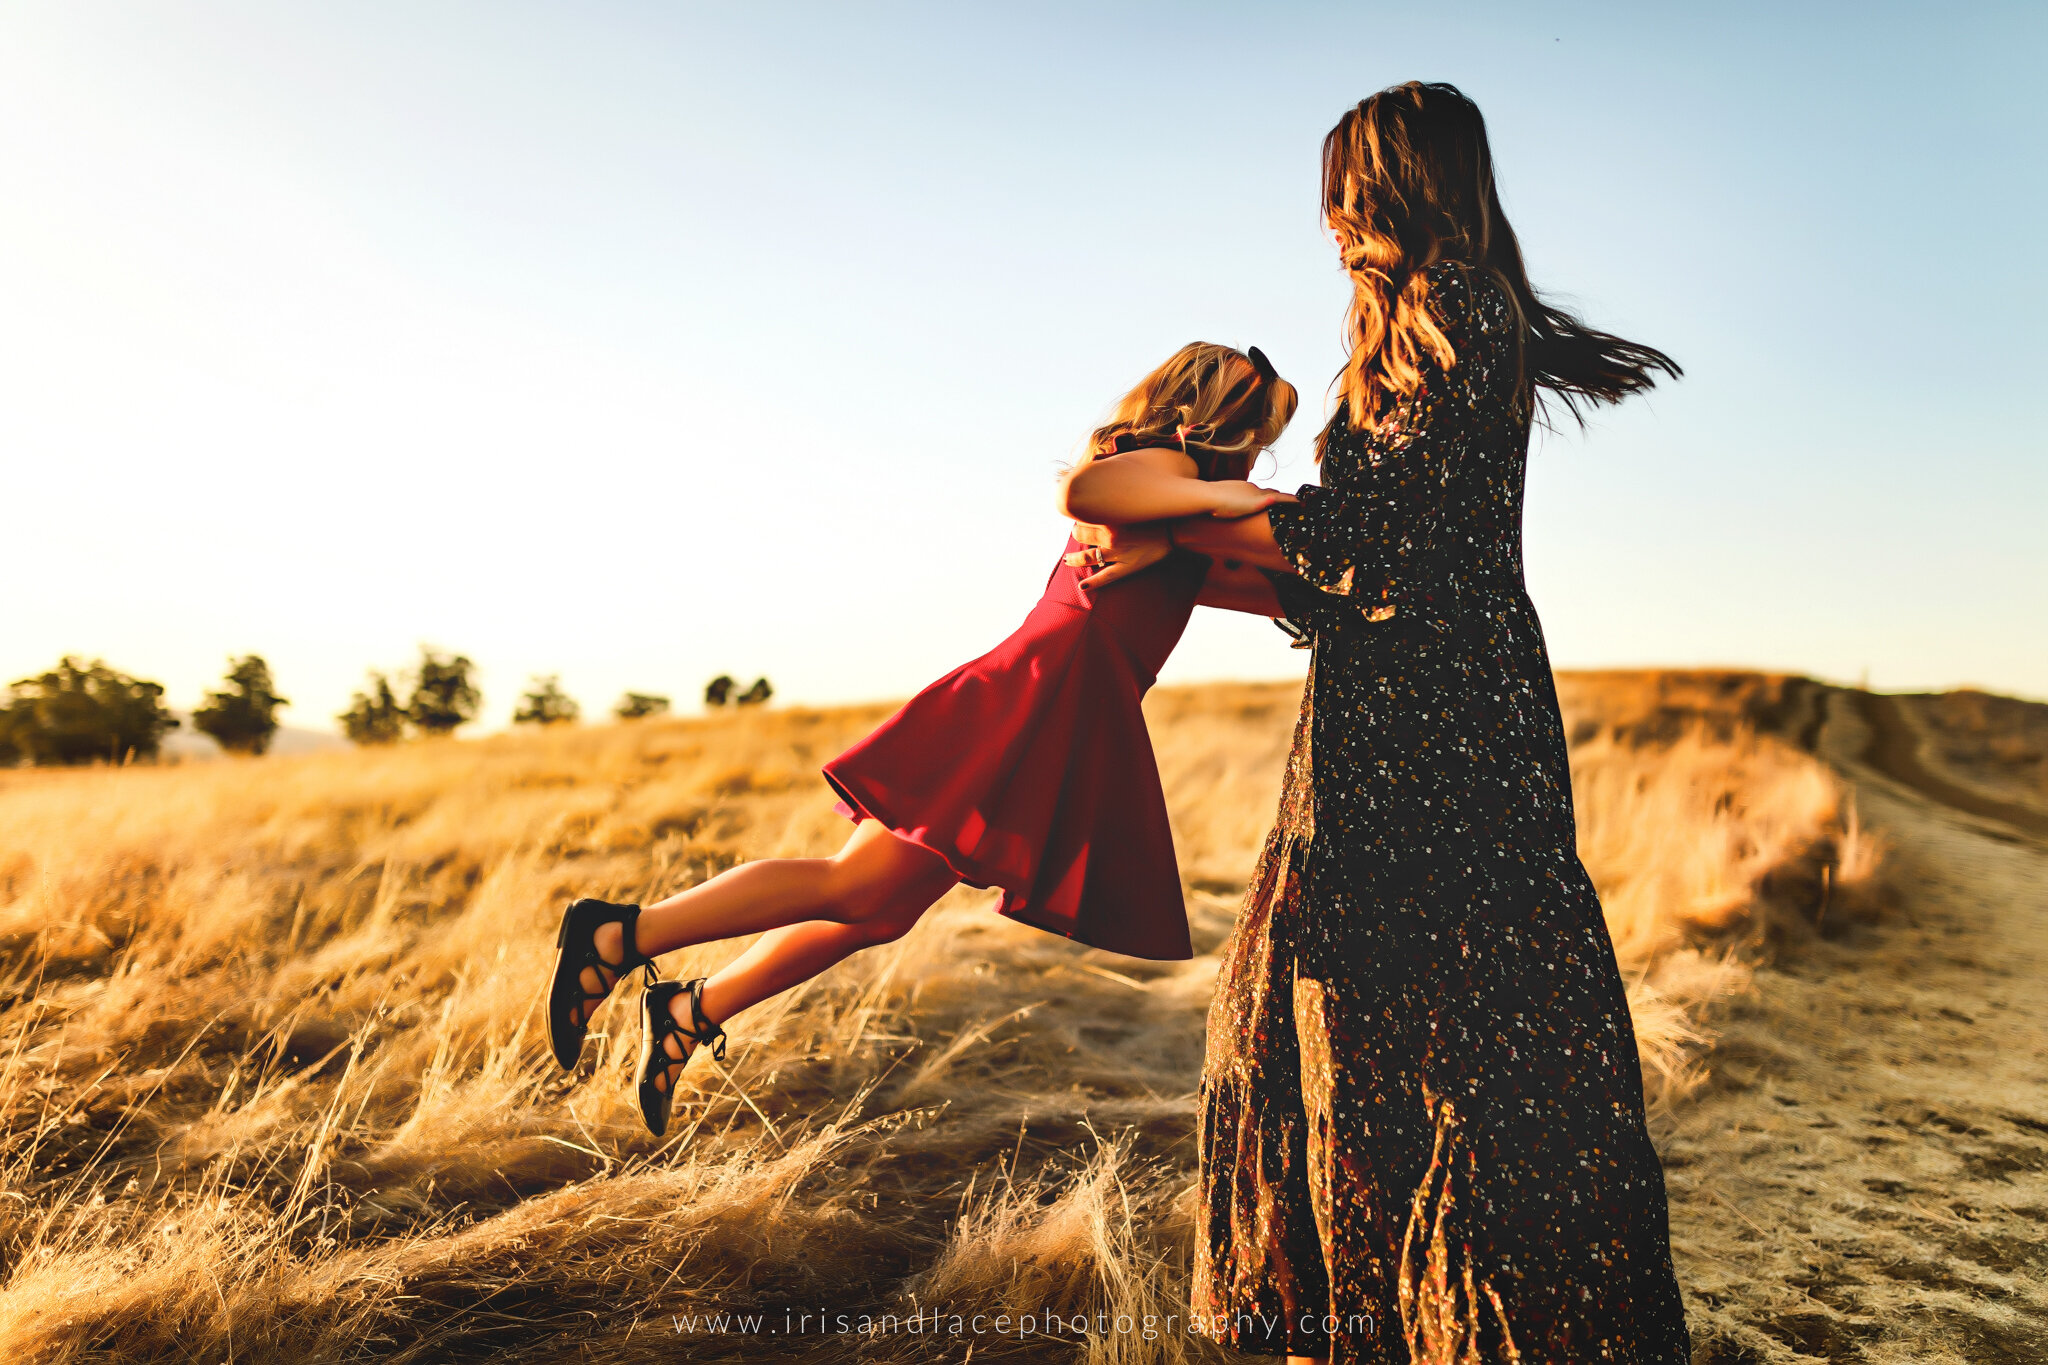 Best Family Photographers in Northern California  |  Iris and Lace Photography